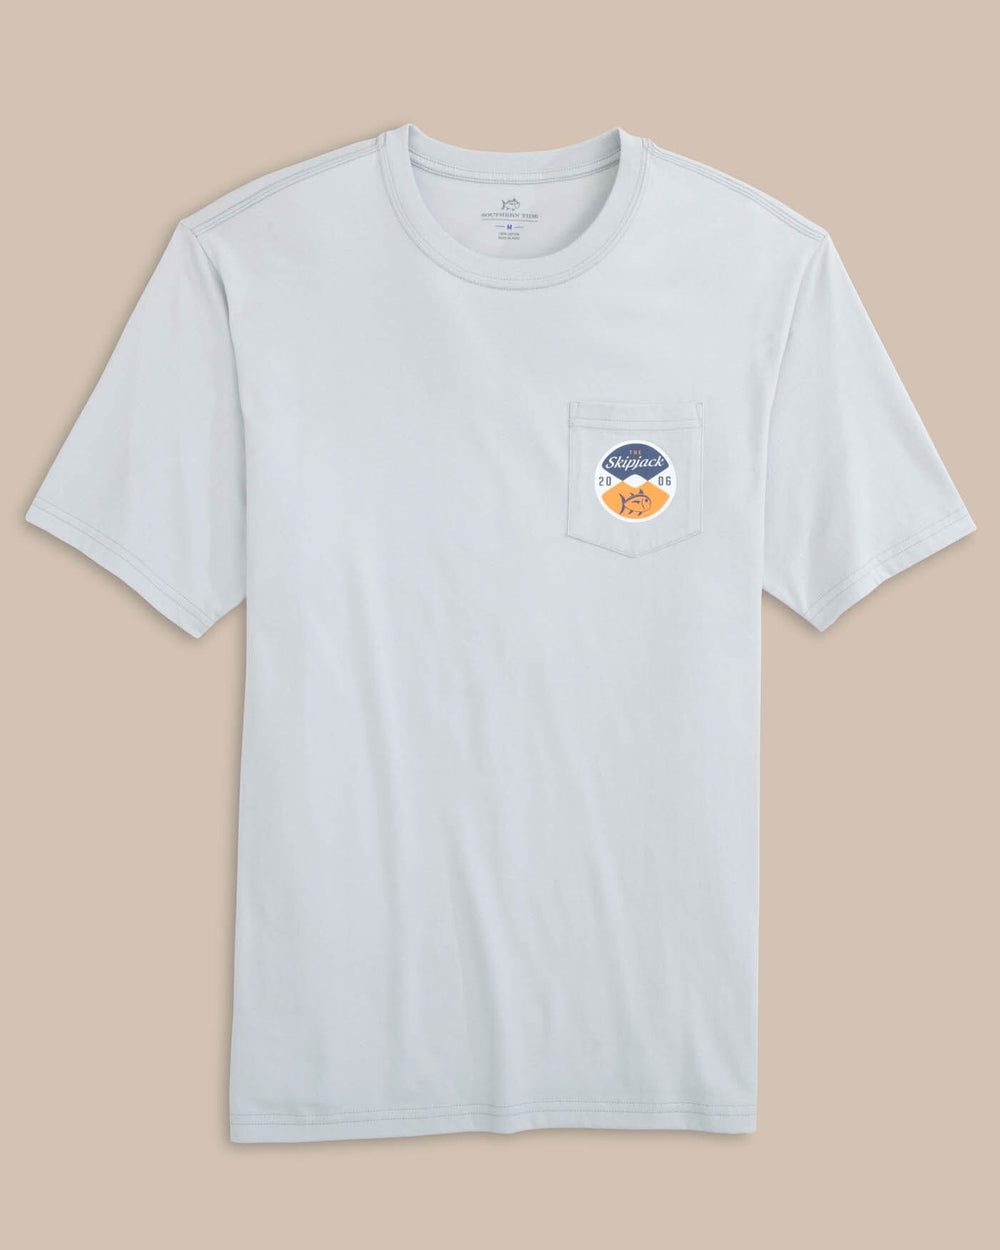 The front view of the Southern Tide Sj Reel Deal Short Sleeve T-Shirt by Southern Tide - Platinum Grey